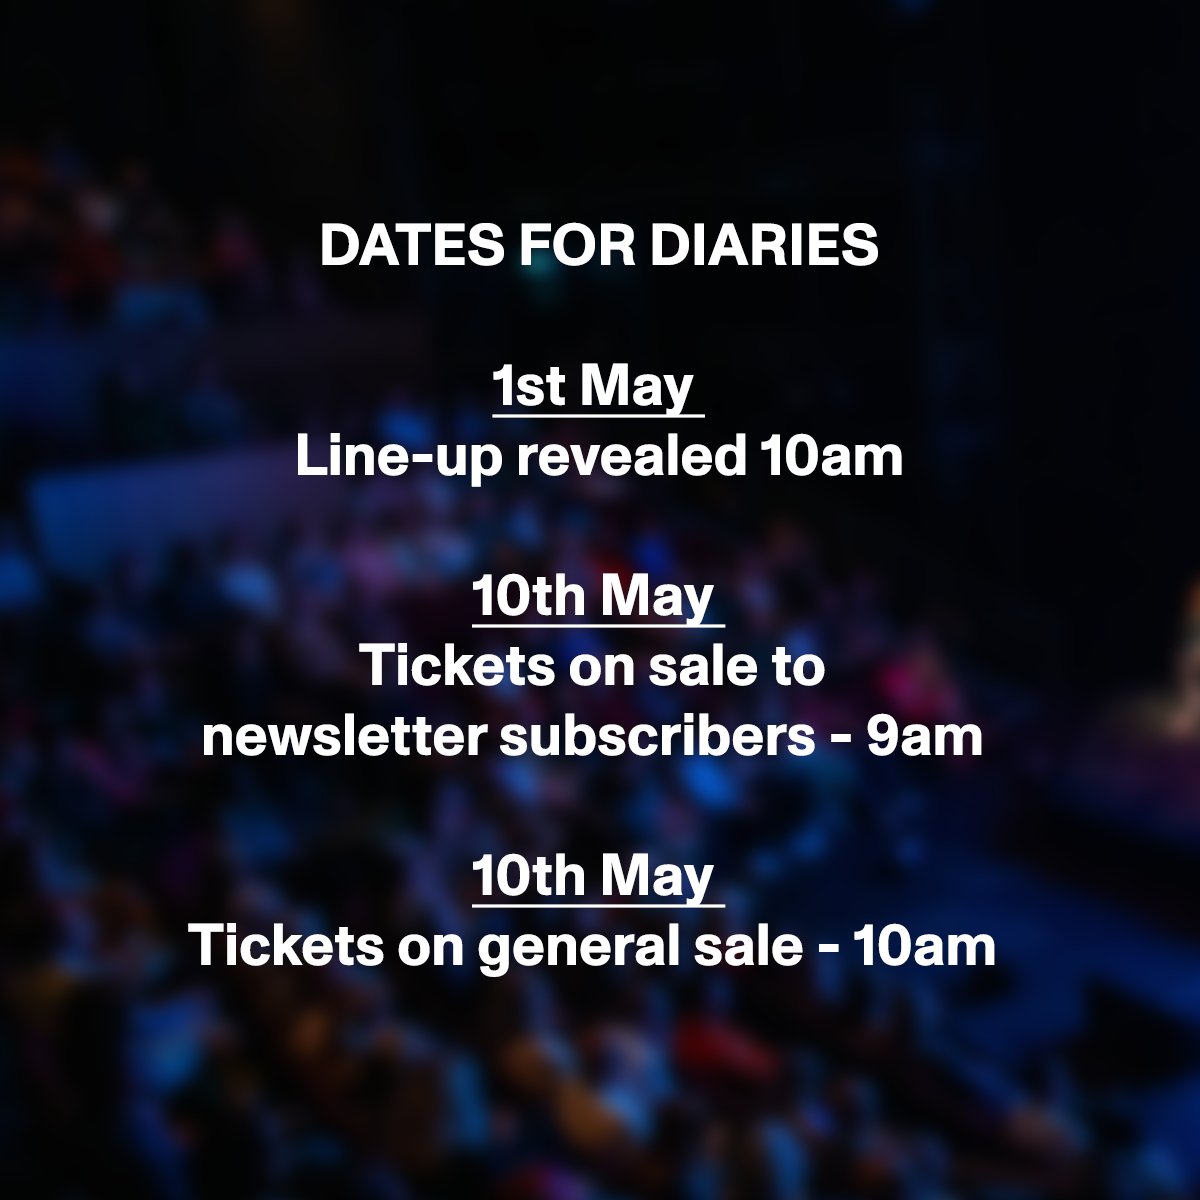 📆 DATES FOR DIARIES 📆 We are pleased to reveal that the #LIFI24 line-up will be revealed on 1st May 2024 👏 Tickets will go on sale on 10th May 2024, exclusively to newsletter subscribers first and then on general sale at 10am. Sign up 👉 eepurl.com/ilZEYI